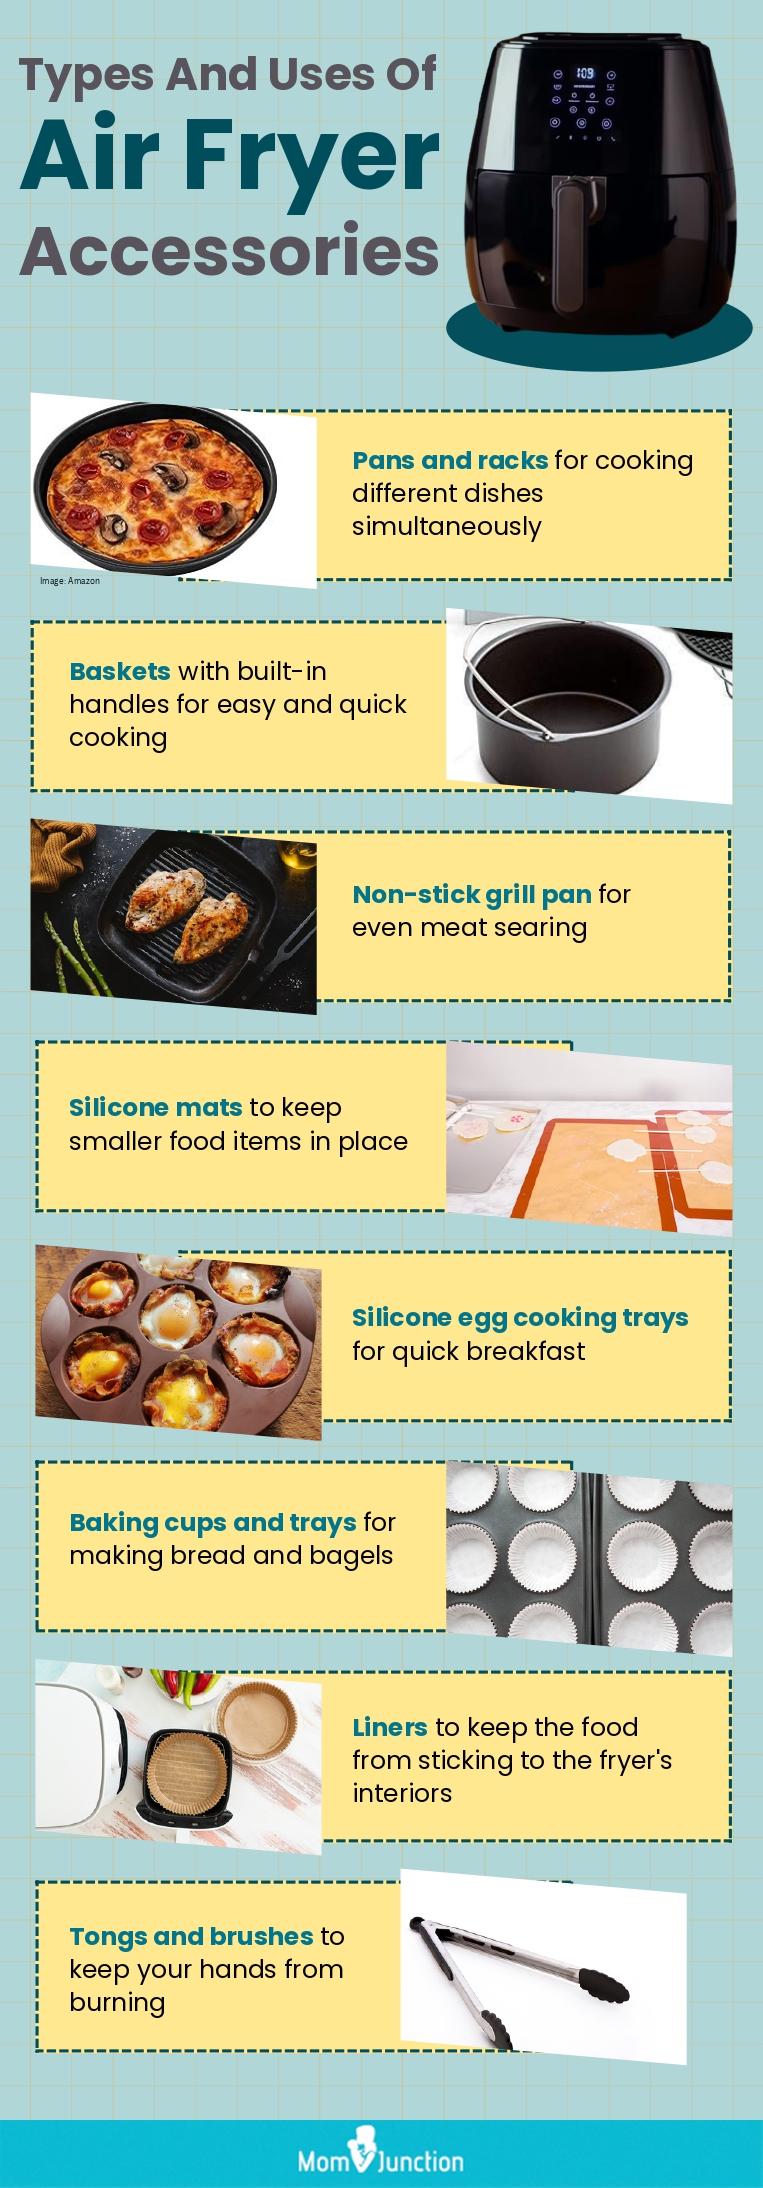 https://www.momjunction.com/wp-content/uploads/2020/07/Types-And-Uses-Of-Air-Fryer-Accessories-2_page-0001.jpg